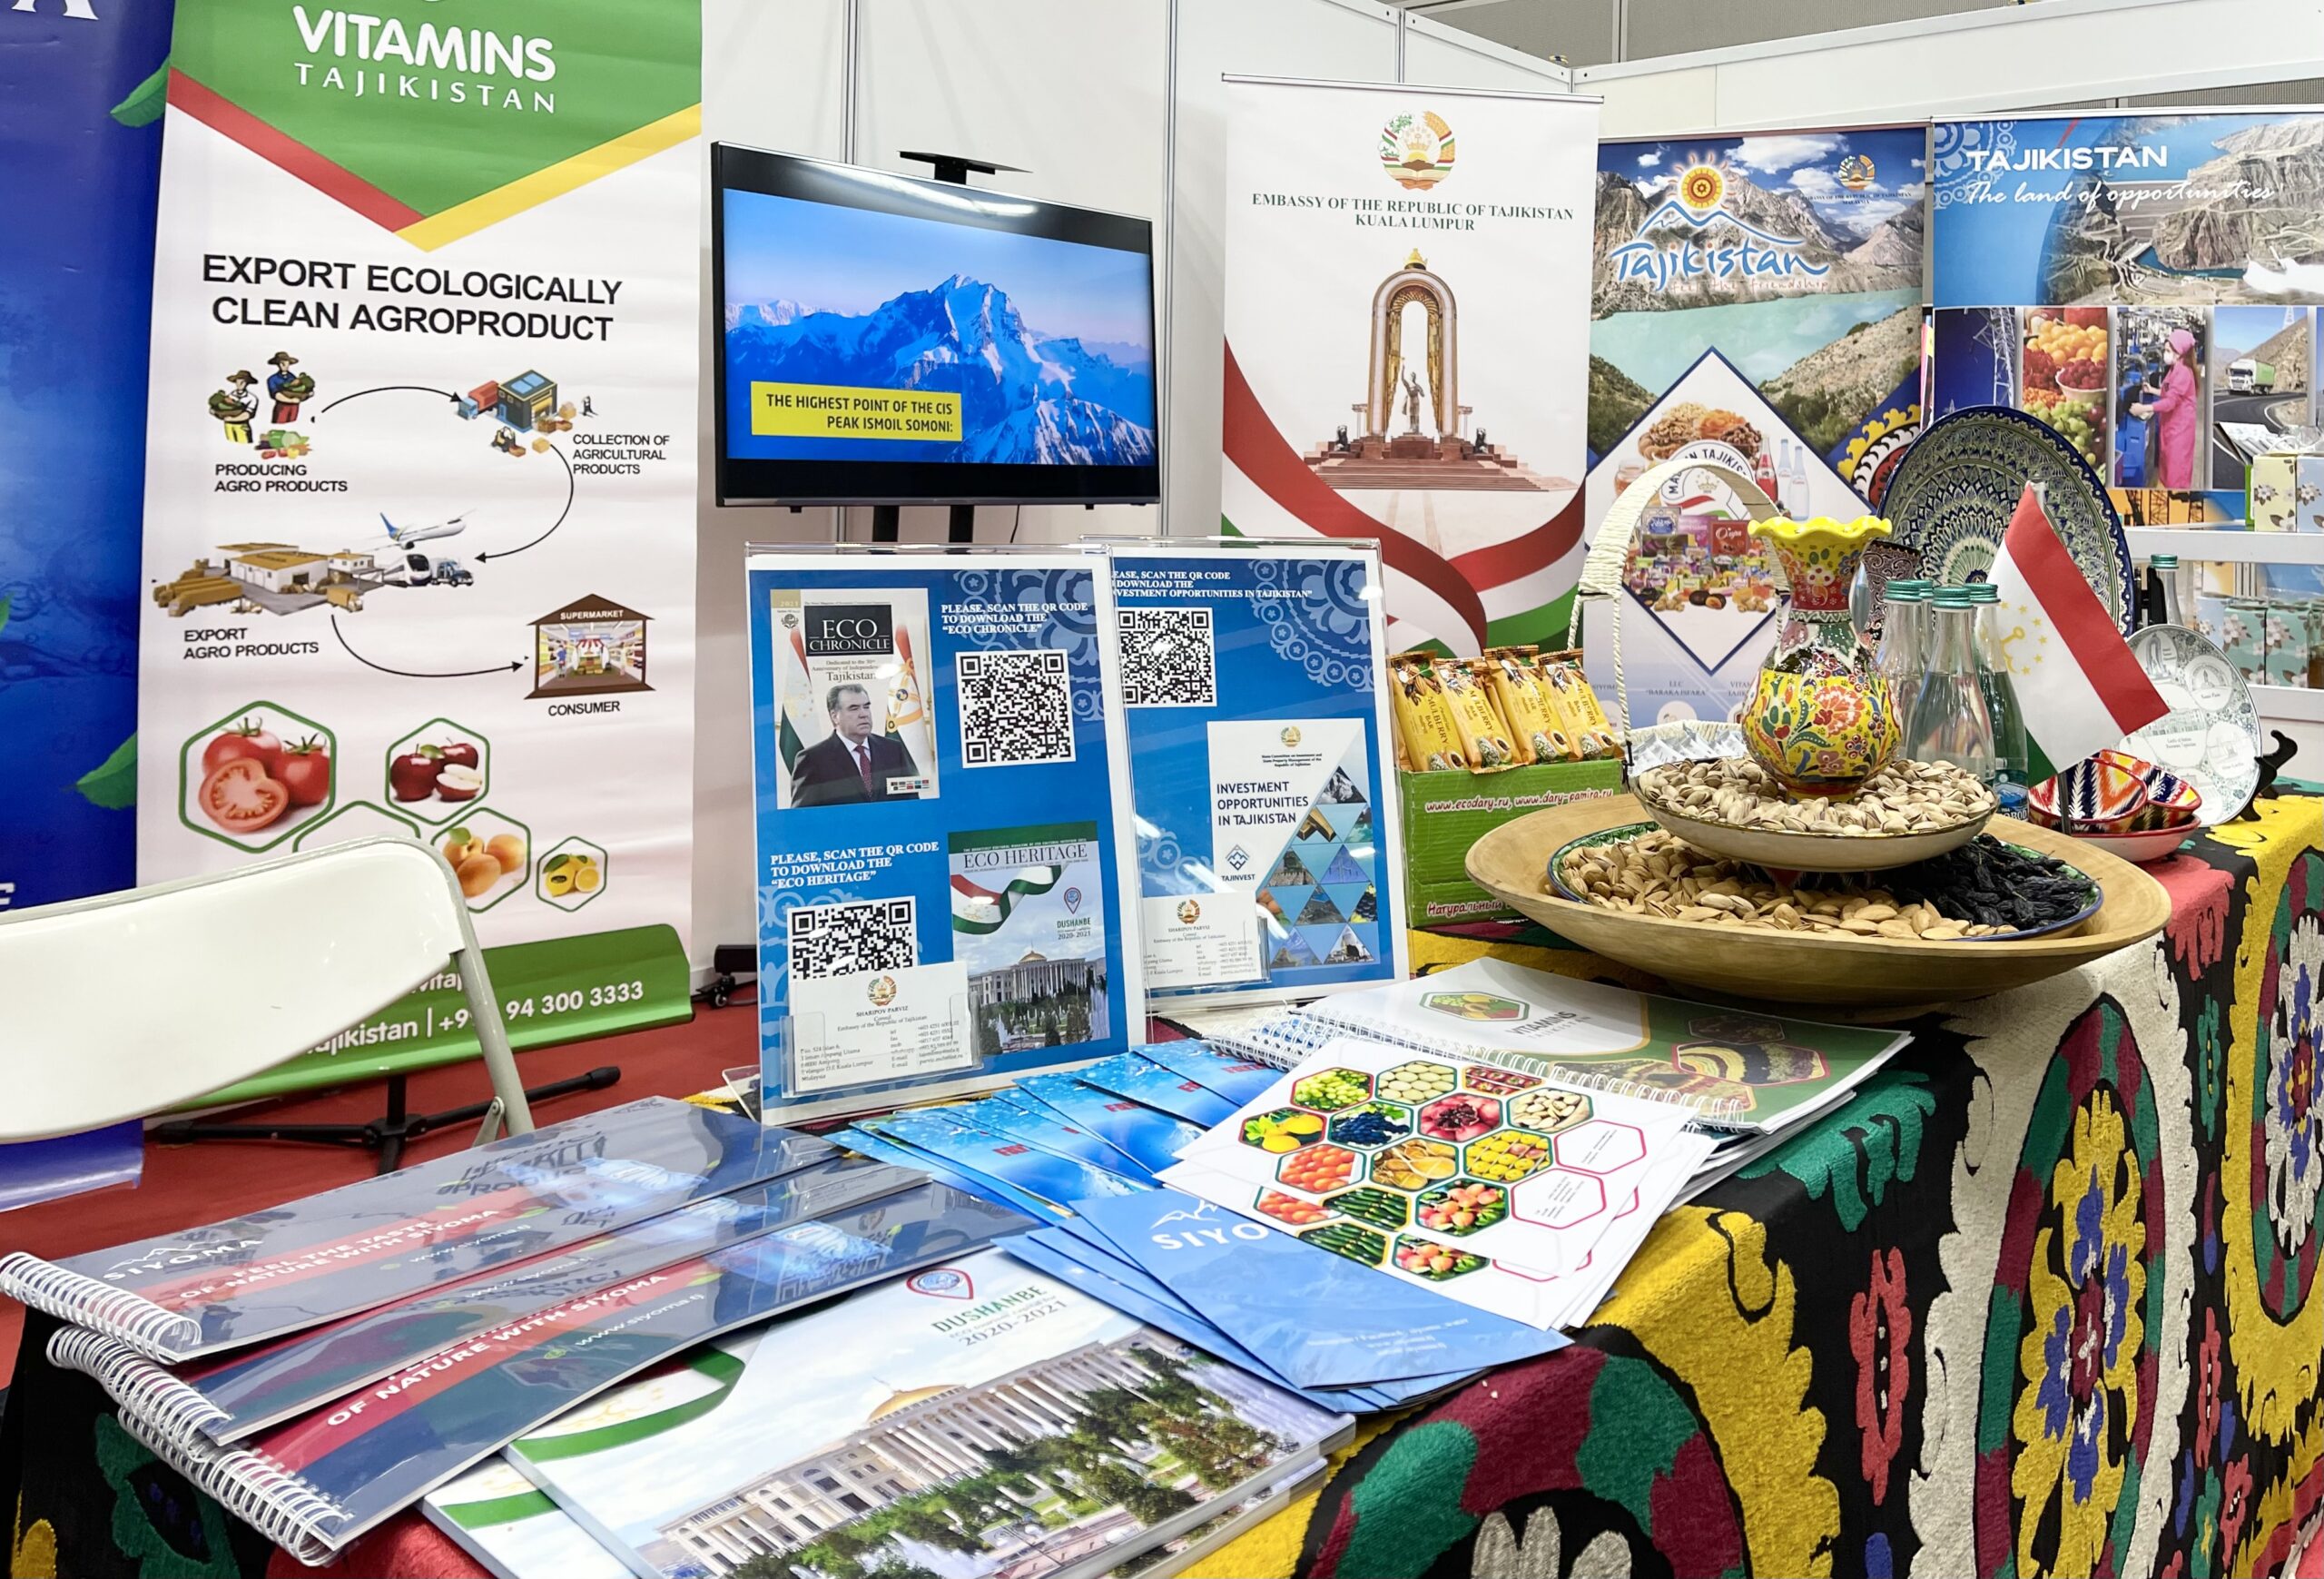 The Embassy of the Republic of Tajikistan participated in the 6th Selangor International Business Summit 2022 and 8th Selangor International Expo (F&B) 2022